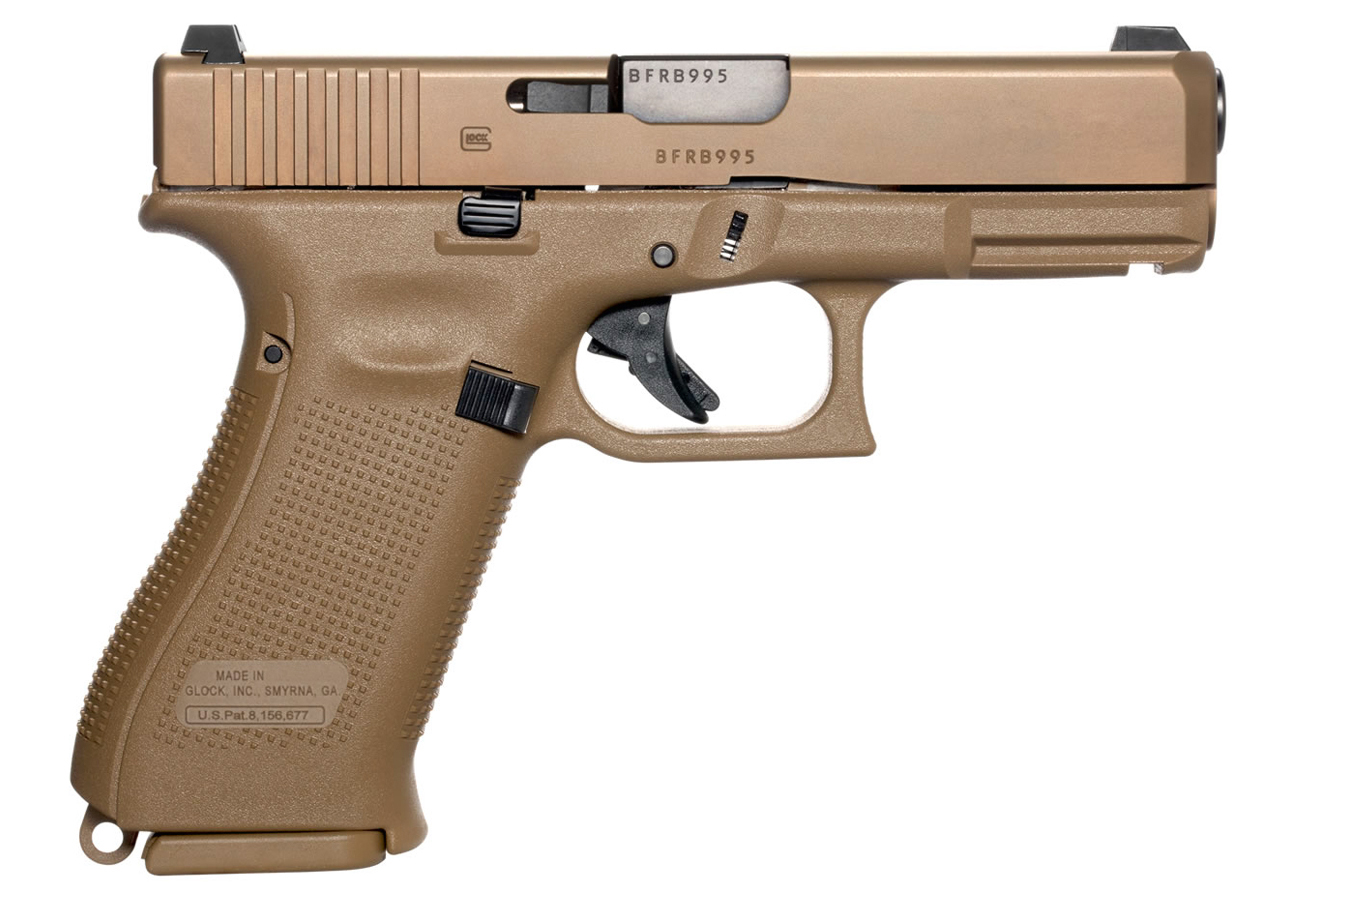 No. 12 Best Selling: GLOCK 19X 9MM FULL-SIZE FDE PISTOL WITH THREE MAGAZINES (MADE IN USA)